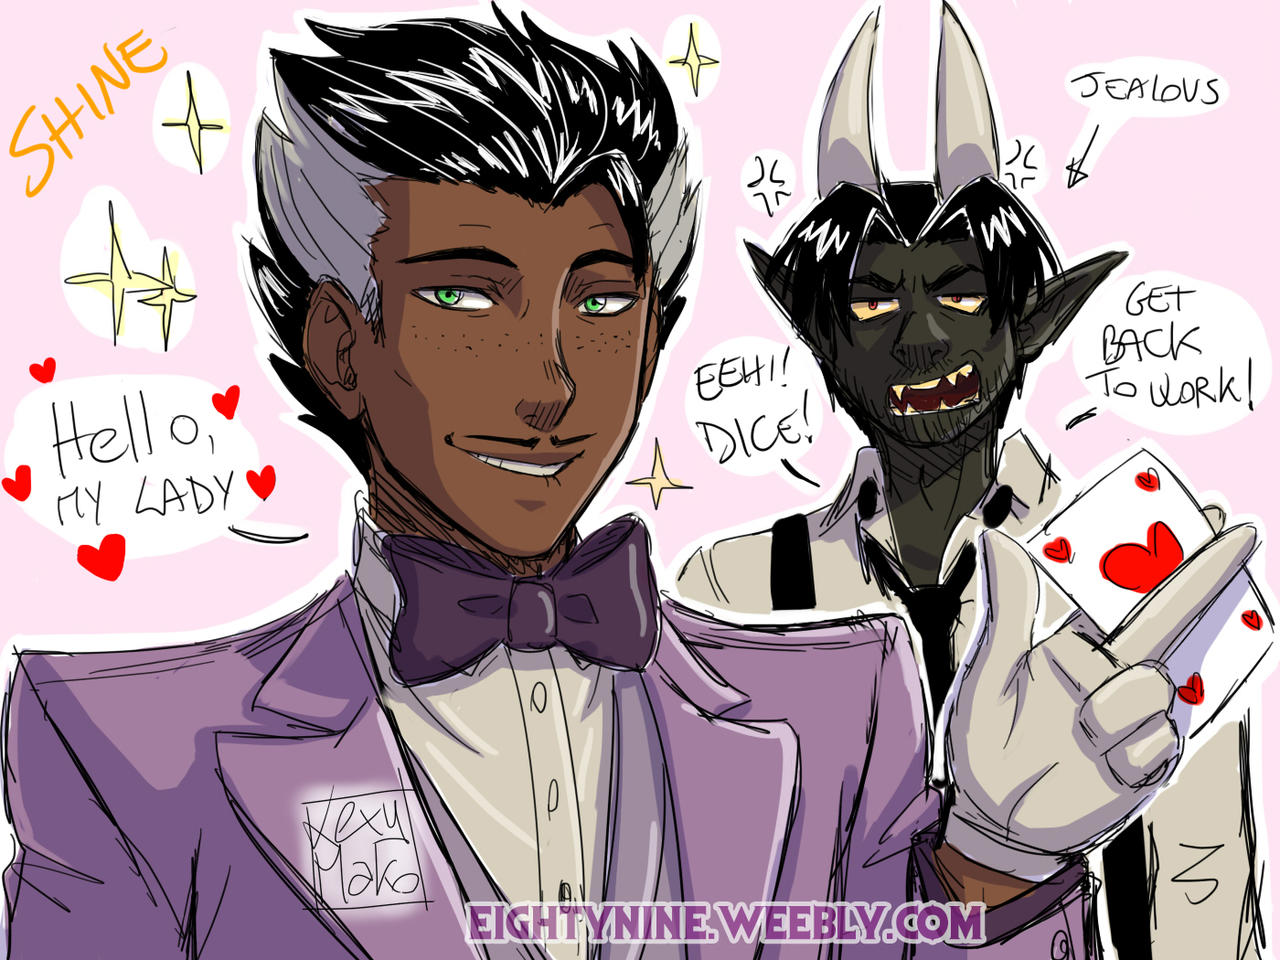 King Dice and Devil by Manoma614 on DeviantArt